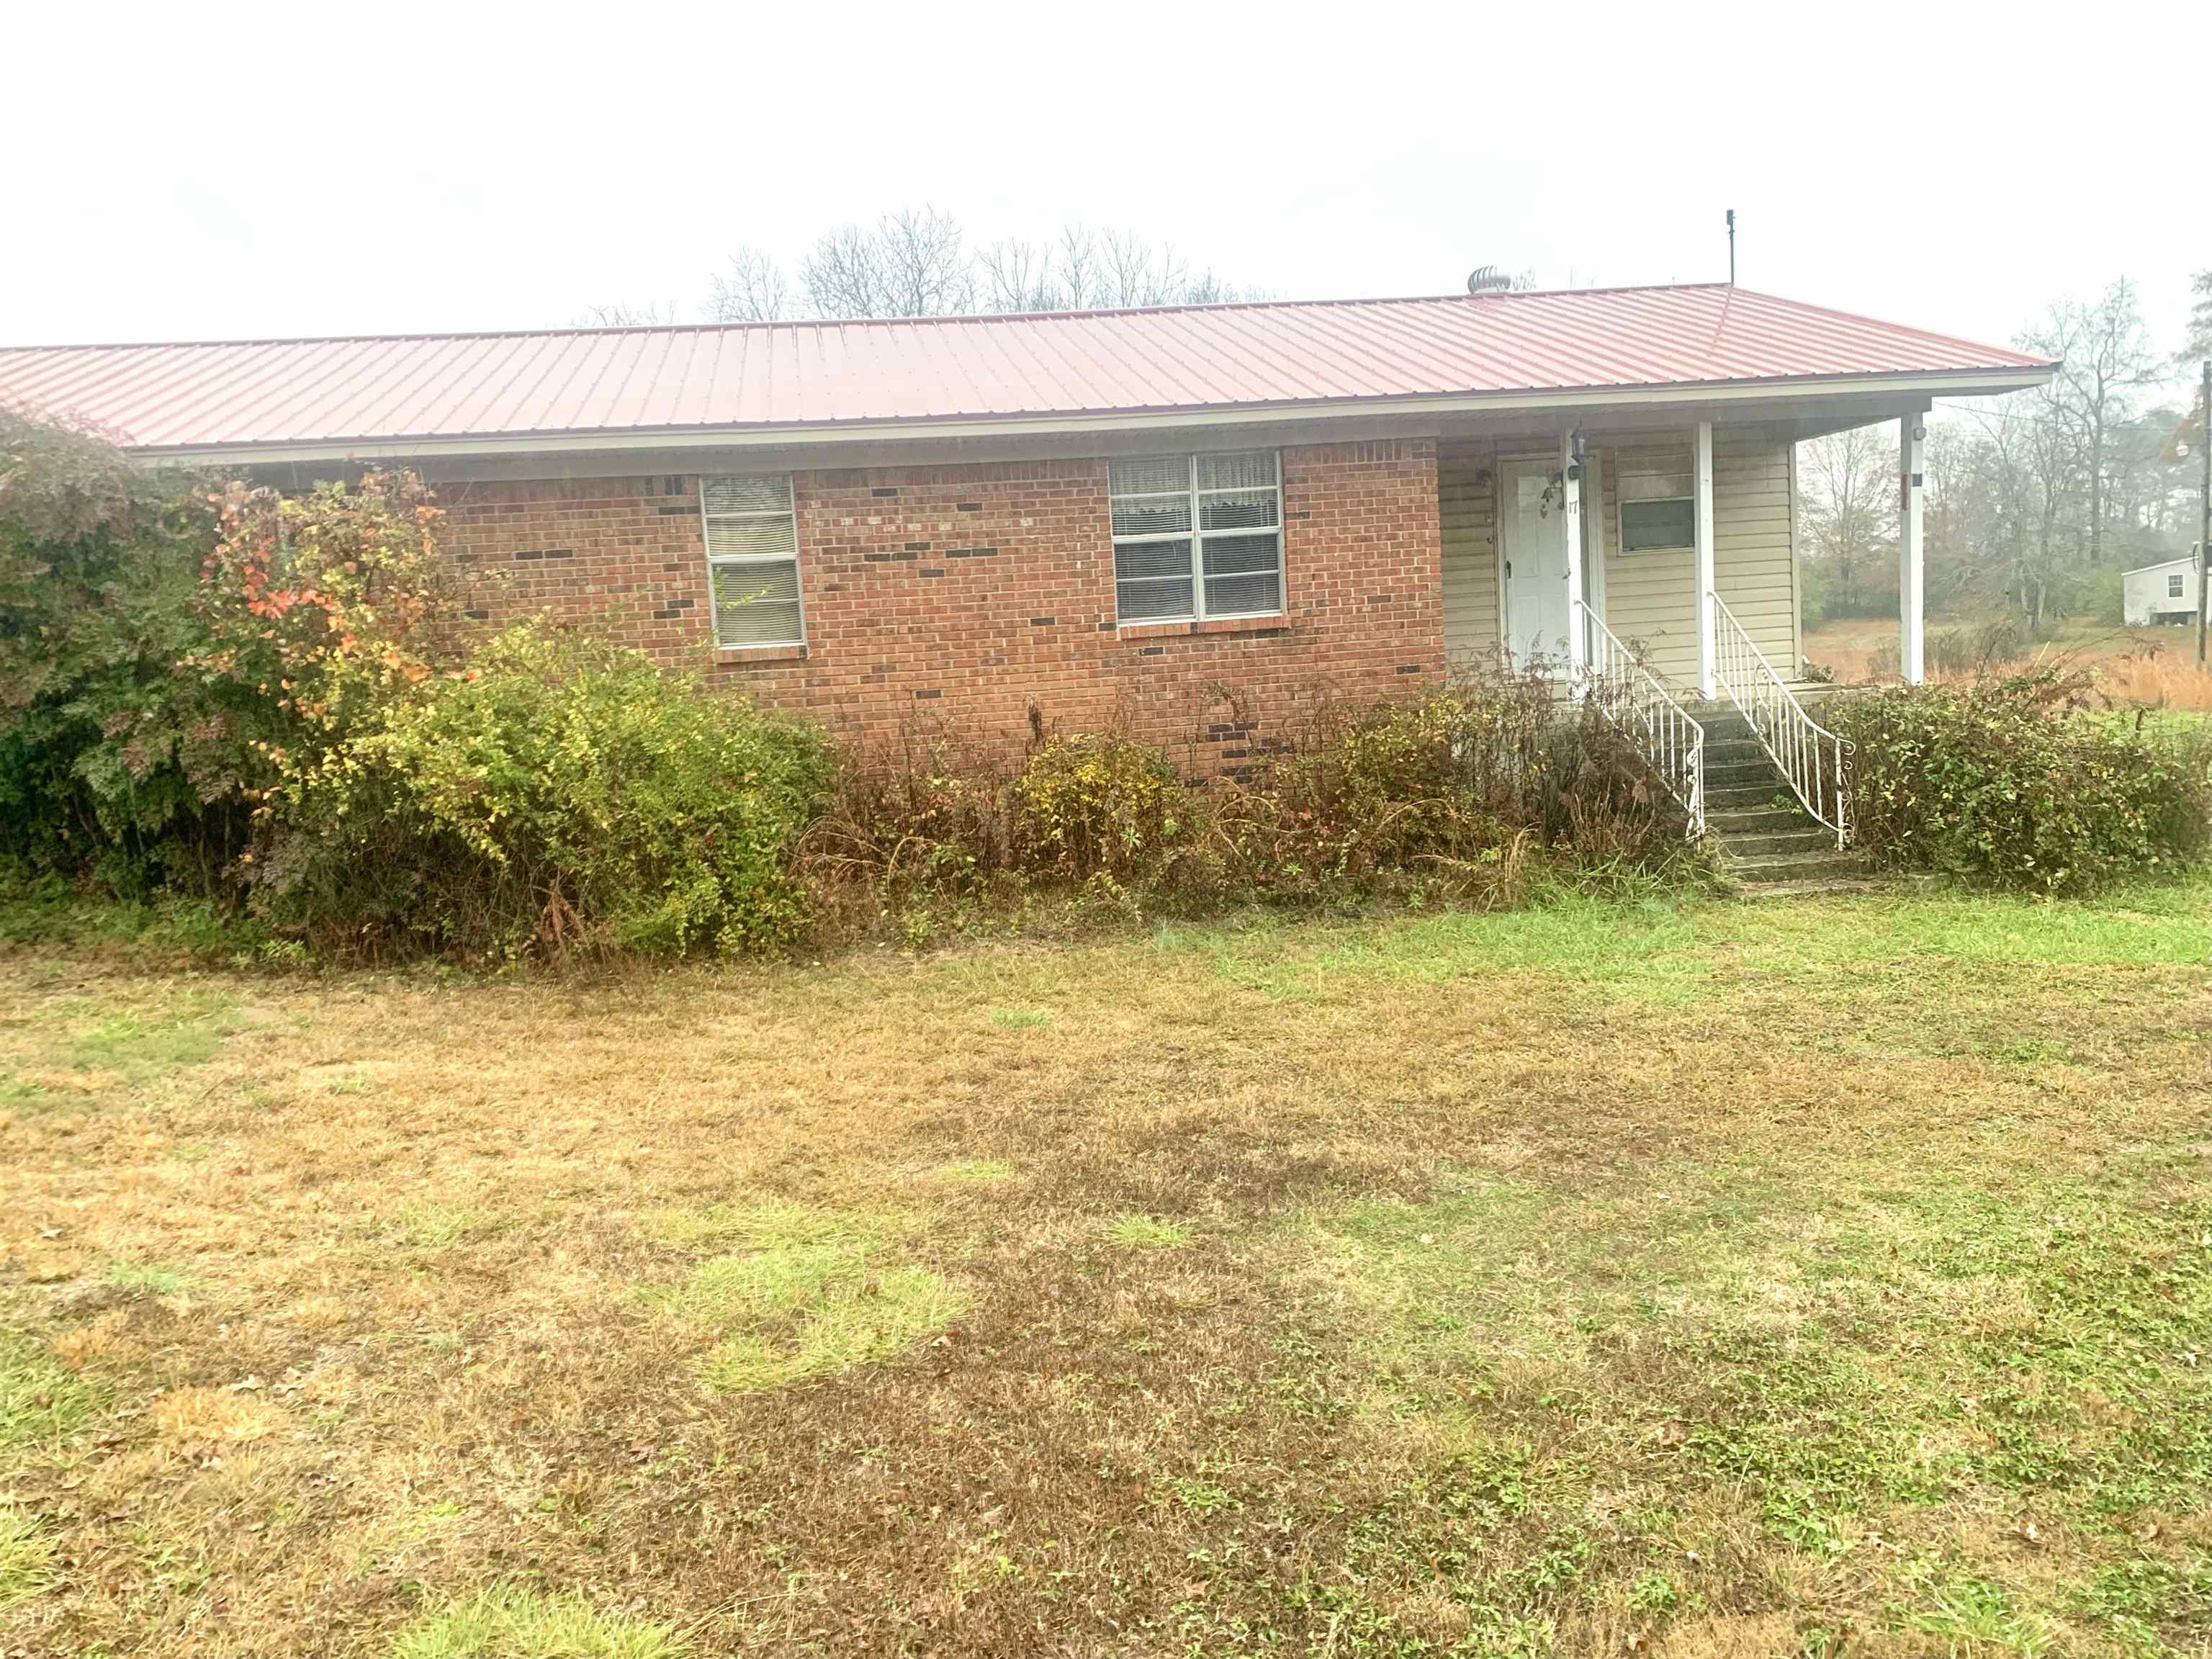 Take a look at this 3 bedroom 2 bath brick rancher sitting on 4.27 +/- acres in rural Phil Campbell.  Many possibilities for this home sold as is! There is a mobile home on the property that will convey at no value.  Call to schedule your showing.